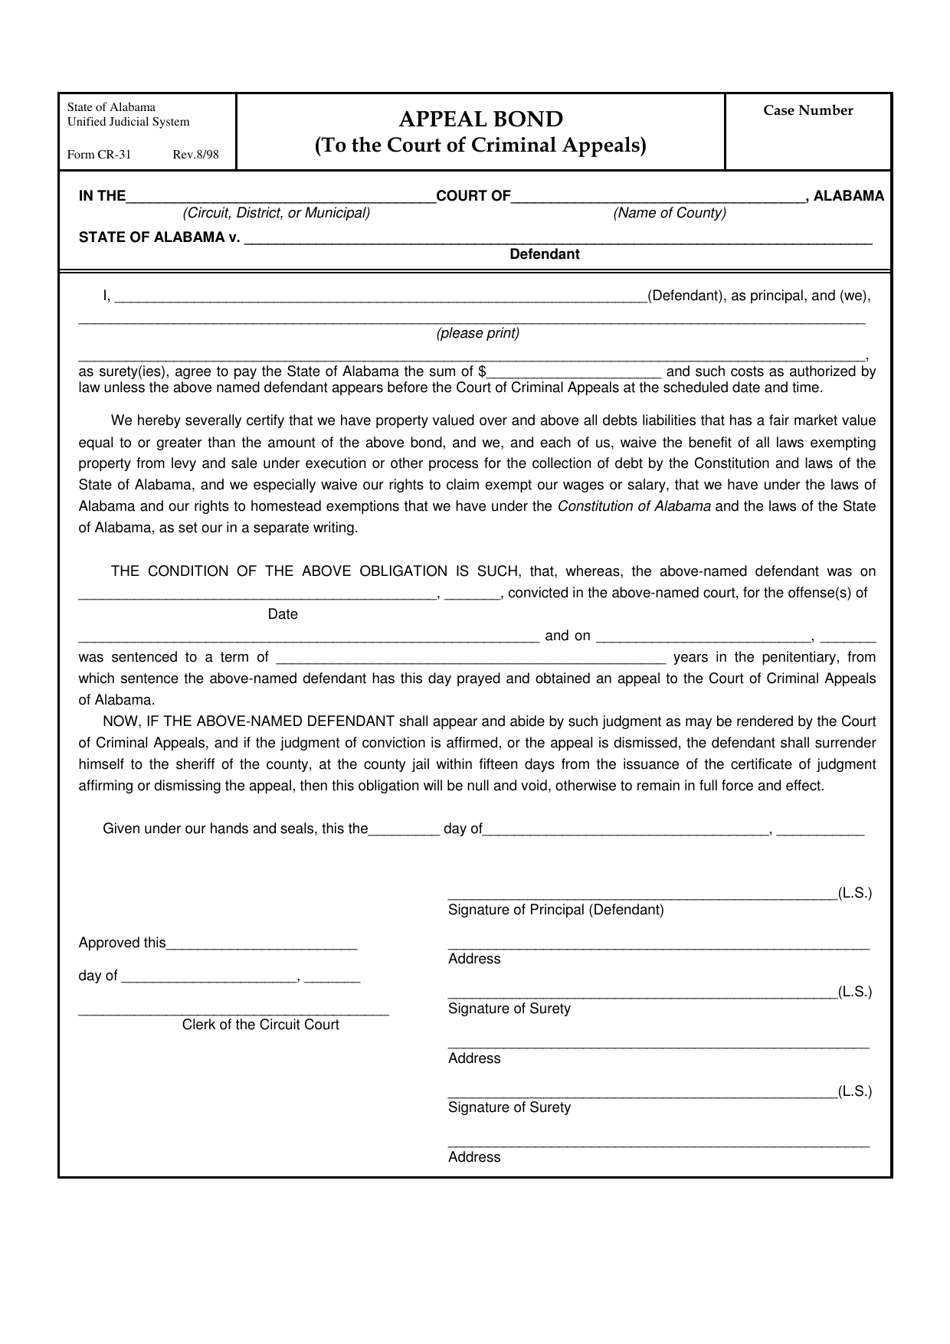 Form CR-31 Appeal Bond (To the Court of Criminal Appeals) - Alabama, Page 1